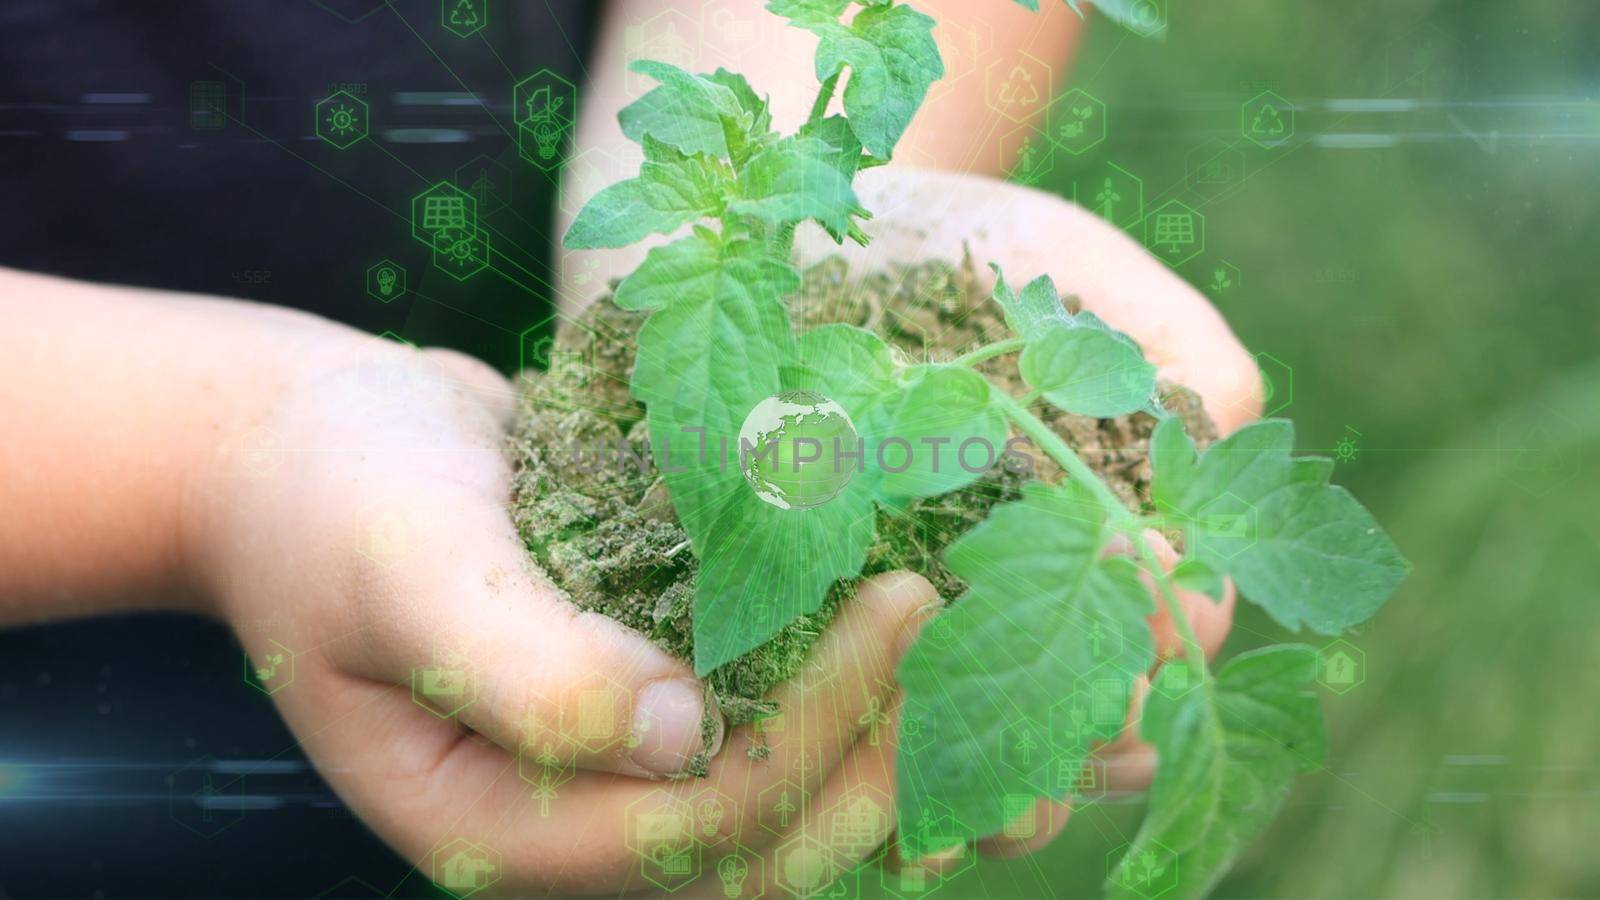 close up hands holding sapling of young oak tree. palms embrace the soil stem a small tree. blurred green background, black shirt. concept nature conservation, Earth protection, reforestation. High quality 4k footage